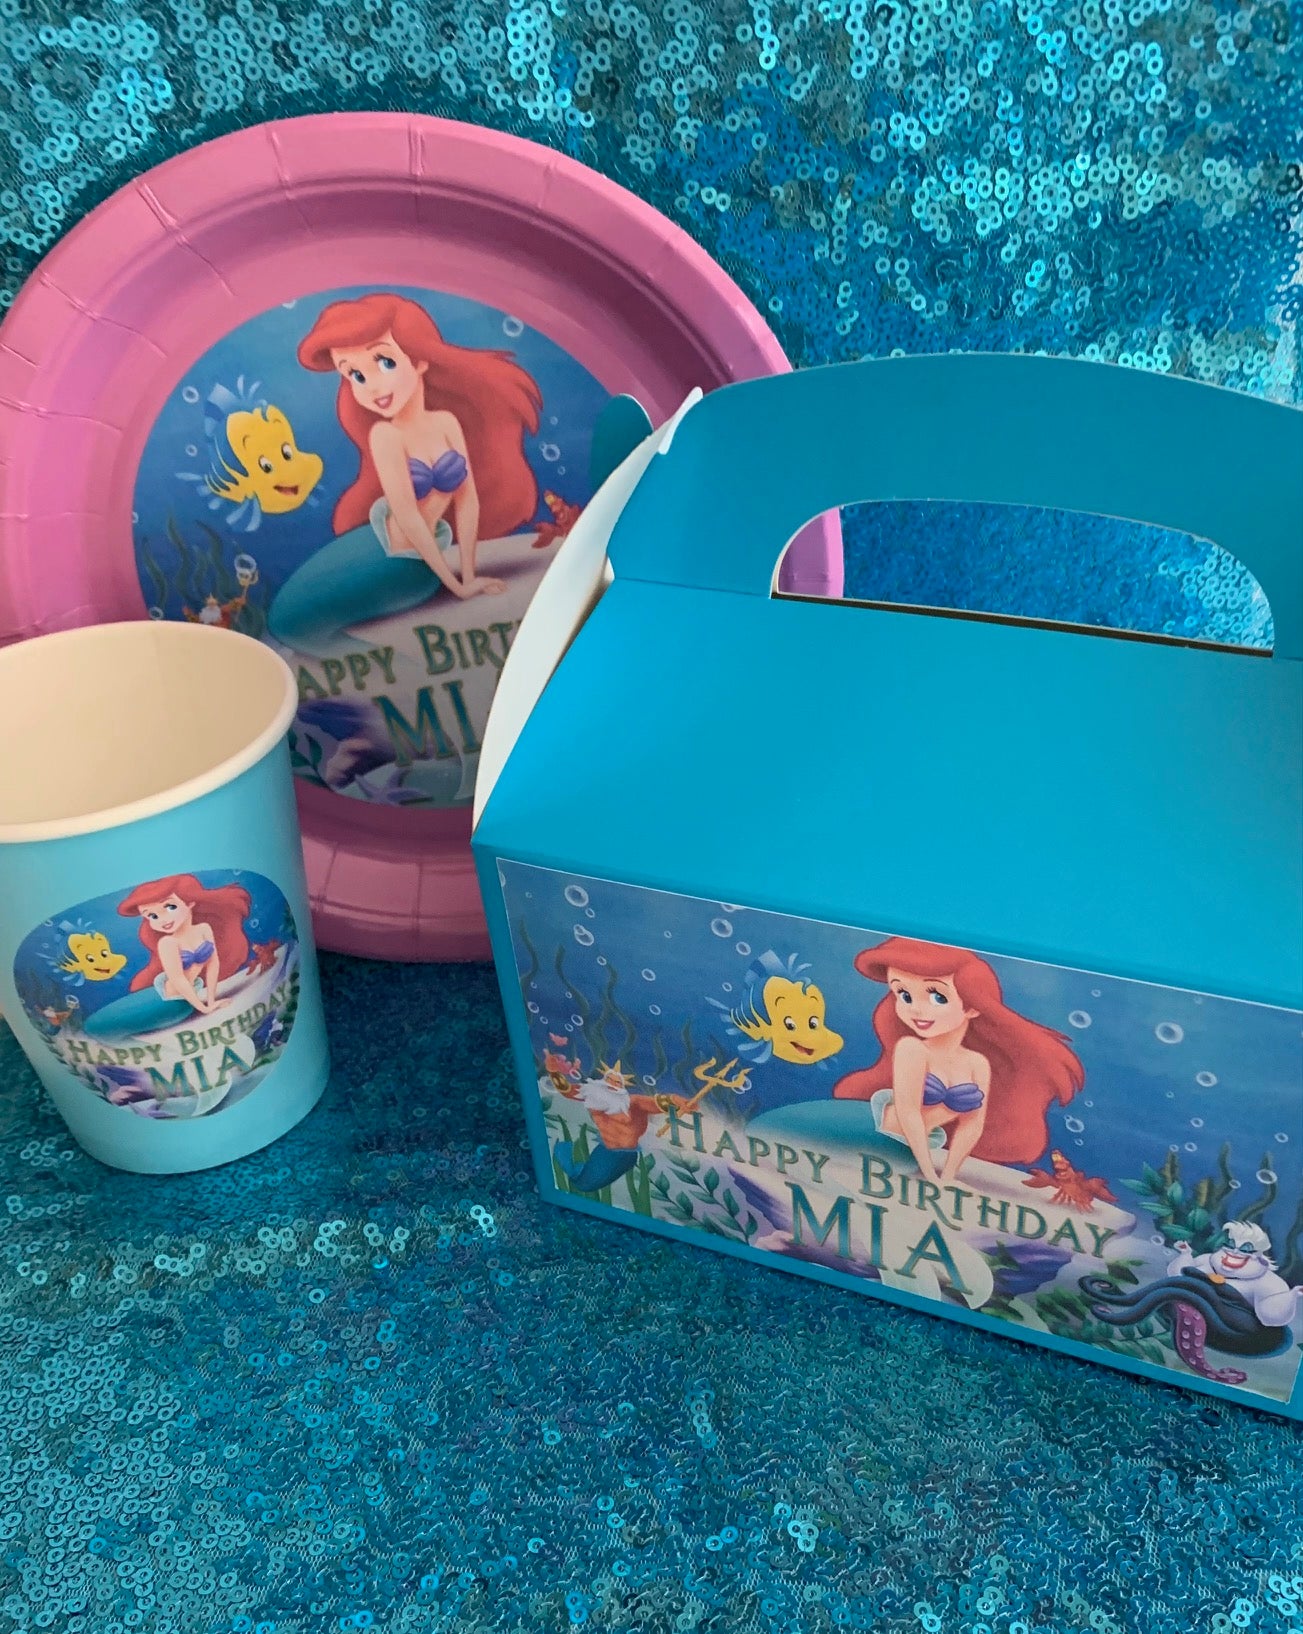 The Little Mermaid party boxes nz